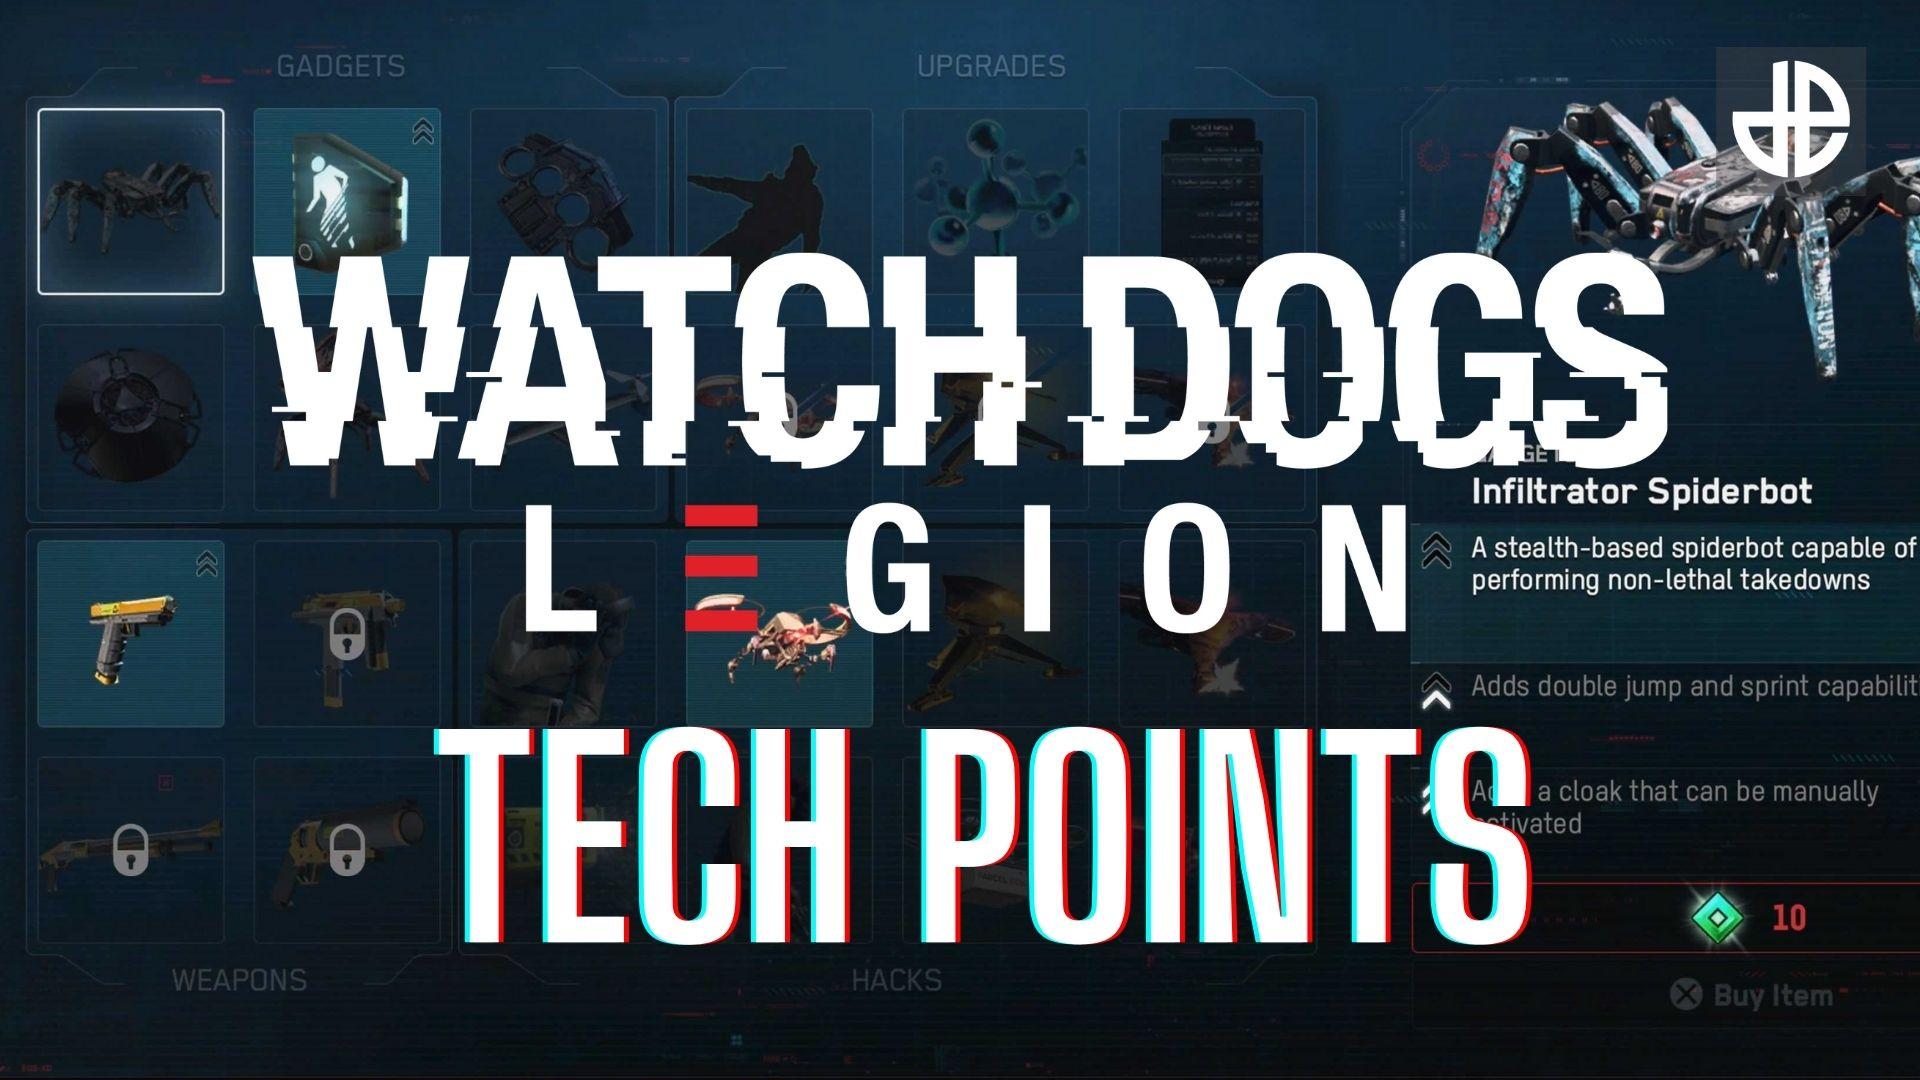 Gadgets, Upgrades, and Hacks to buy first in Watch Dogs: Legion